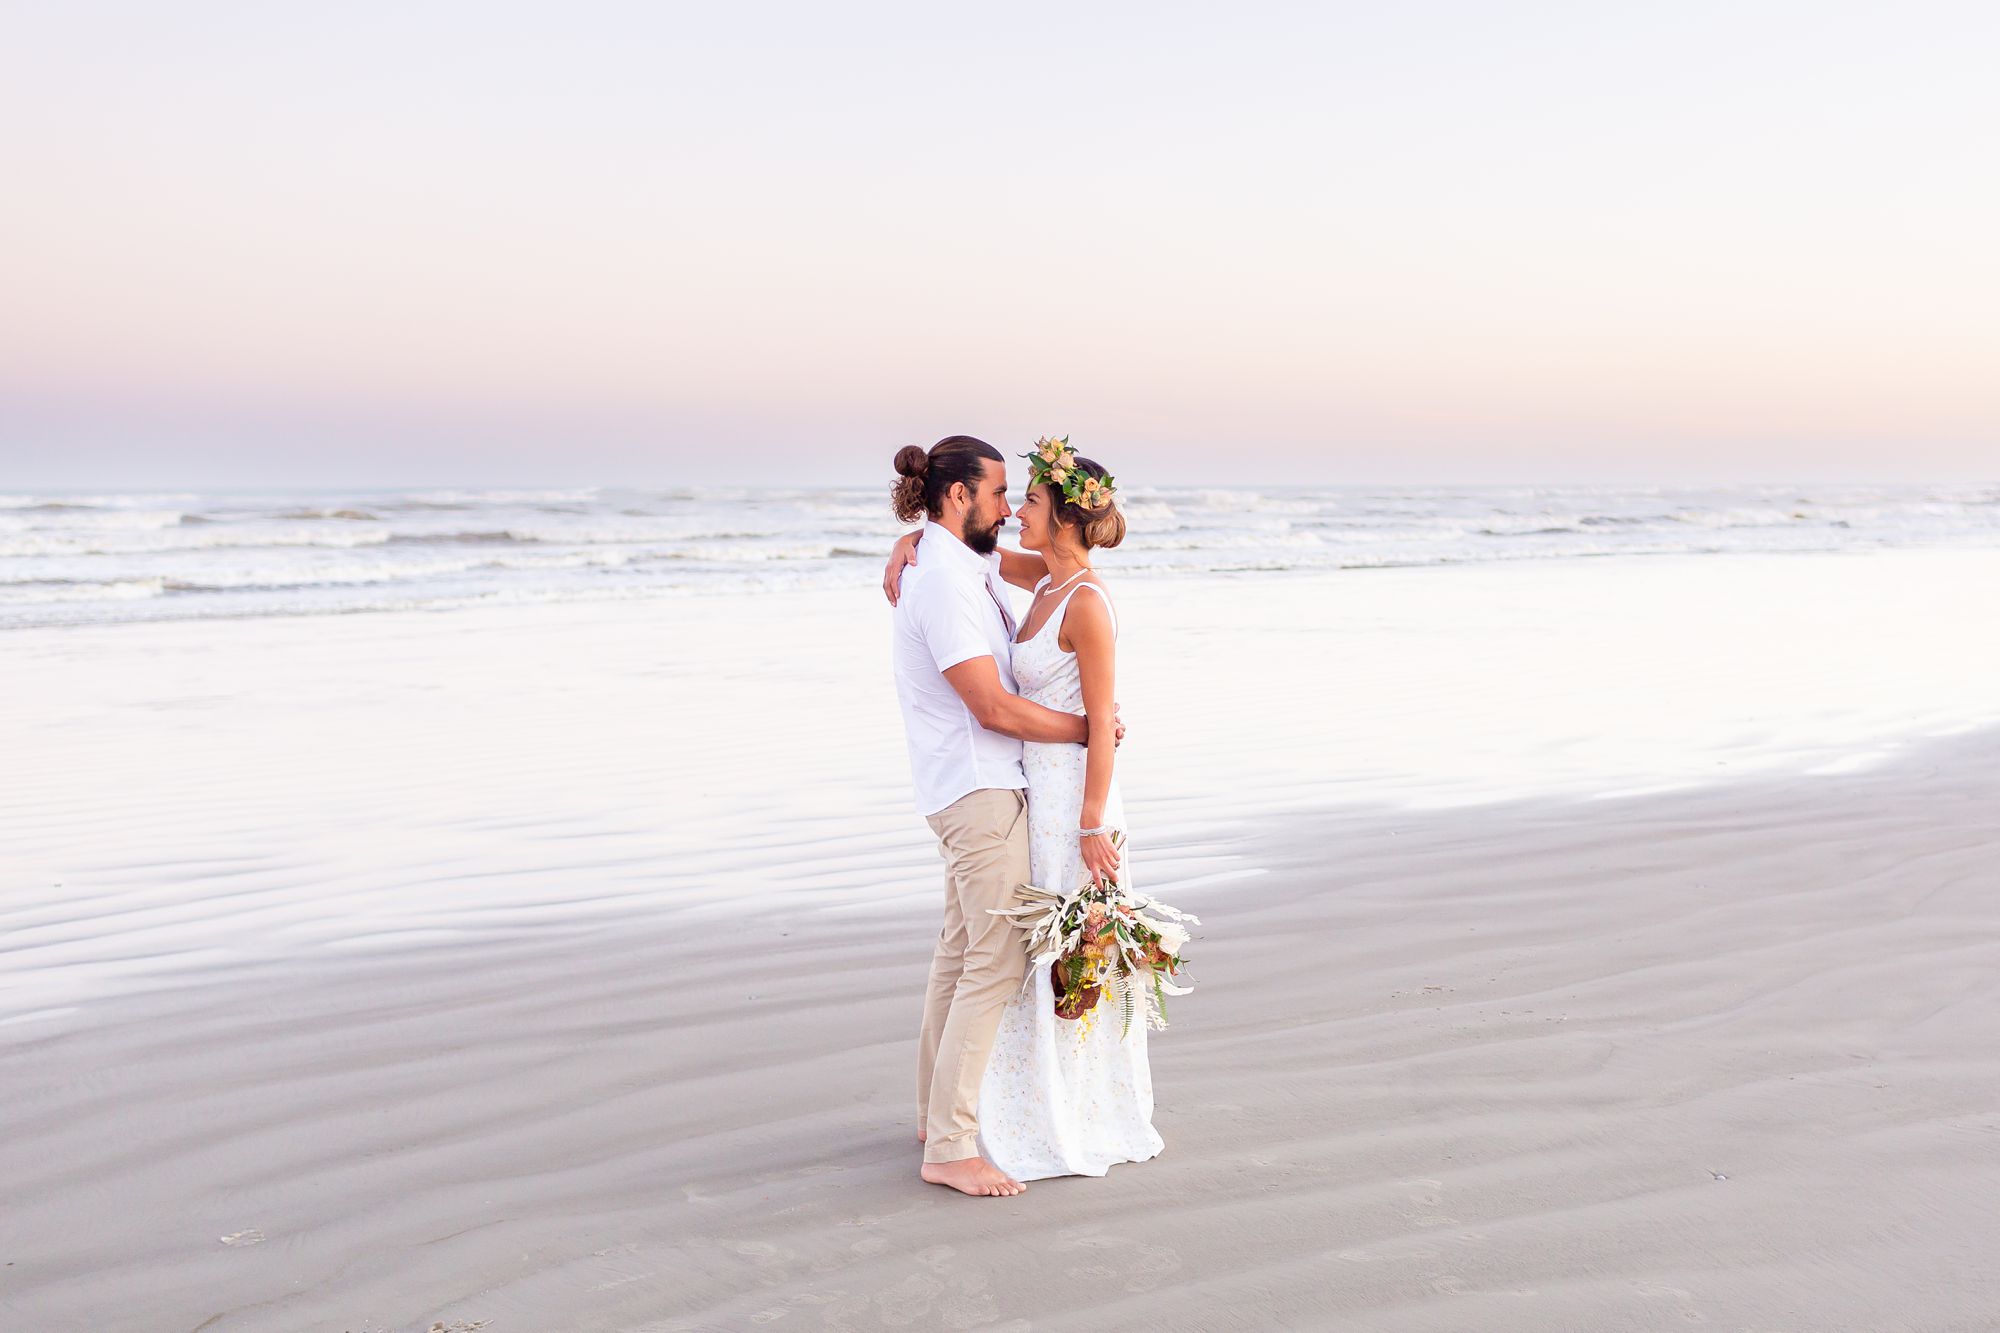 A bride and groom embrace on the beach and smile at each other with the ocean and a pink sky sunset in the background.